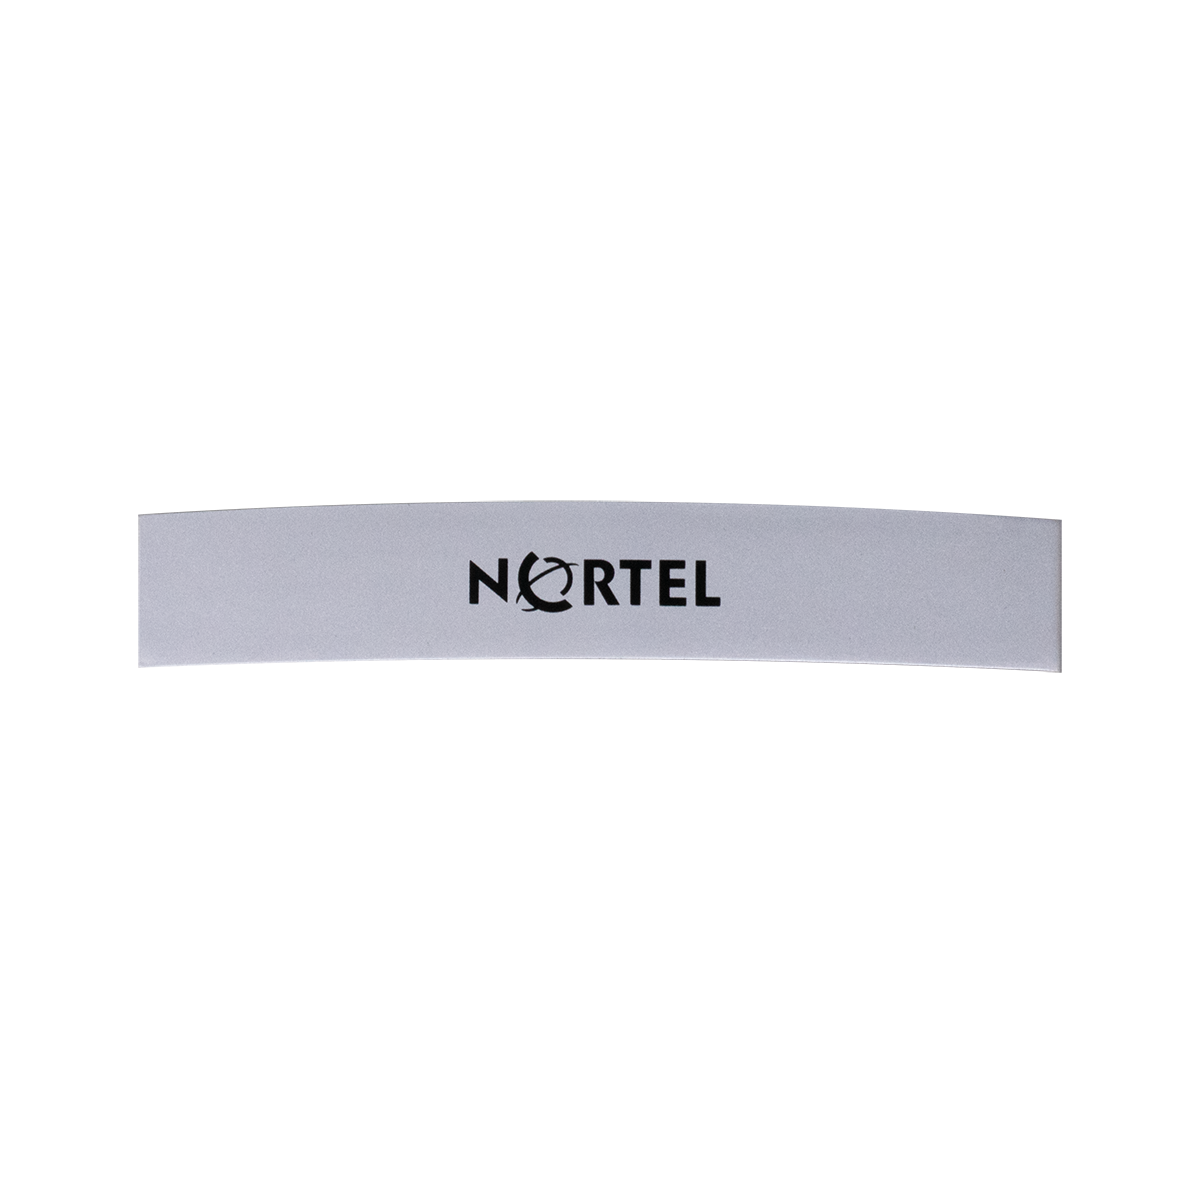 NORTEL, IP, 1140E, FITS ON 1140E FACEPLATE